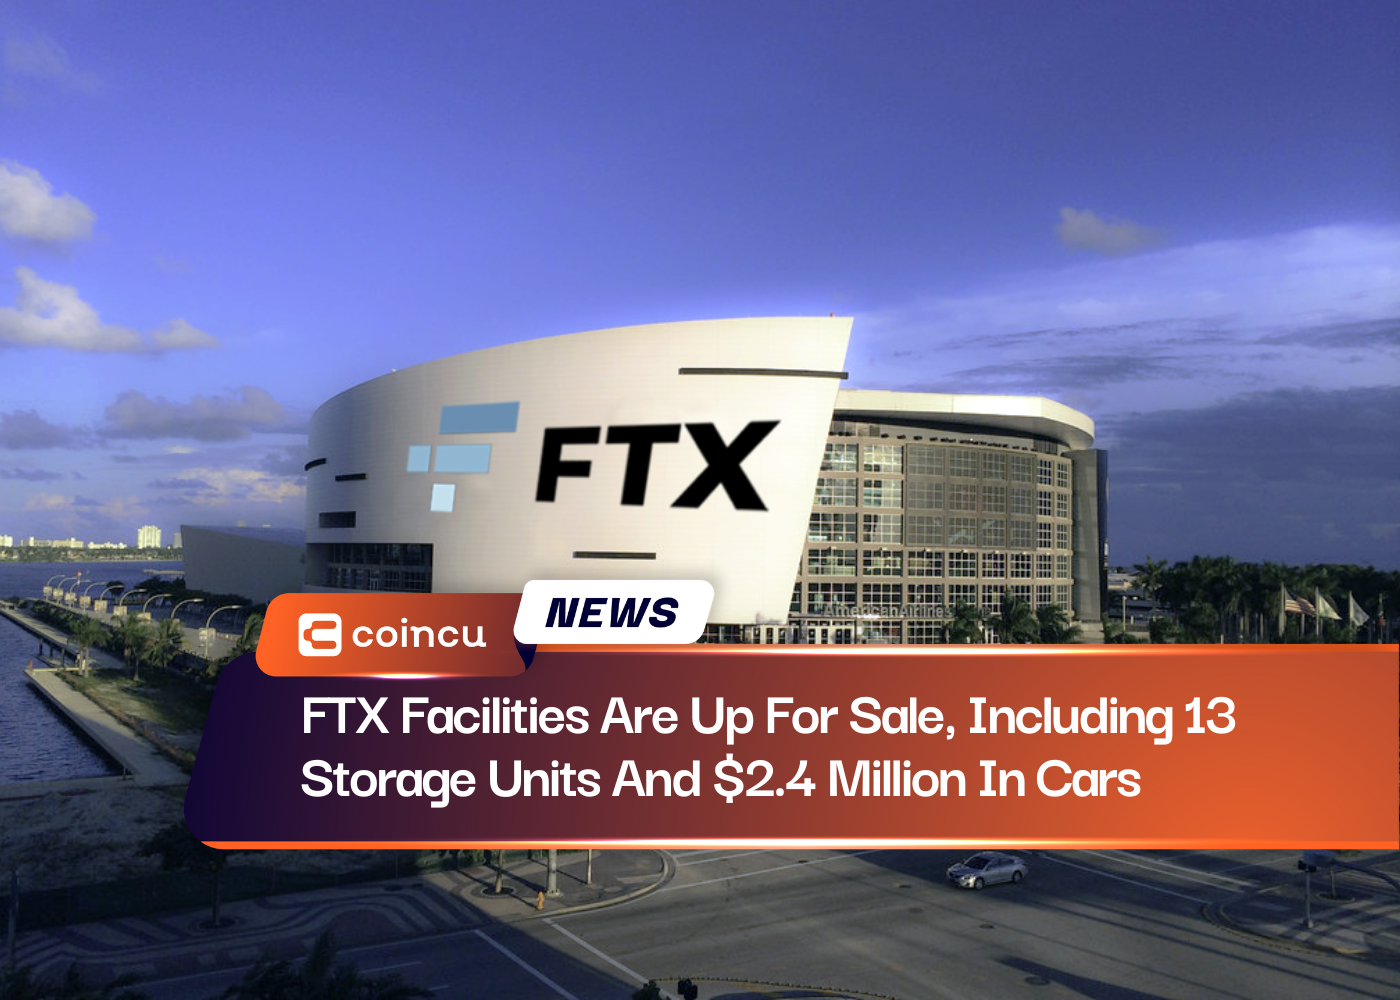 FTX Facilities Are Up For Sale, Including 13 Storage Units And $2.4 Million In Cars